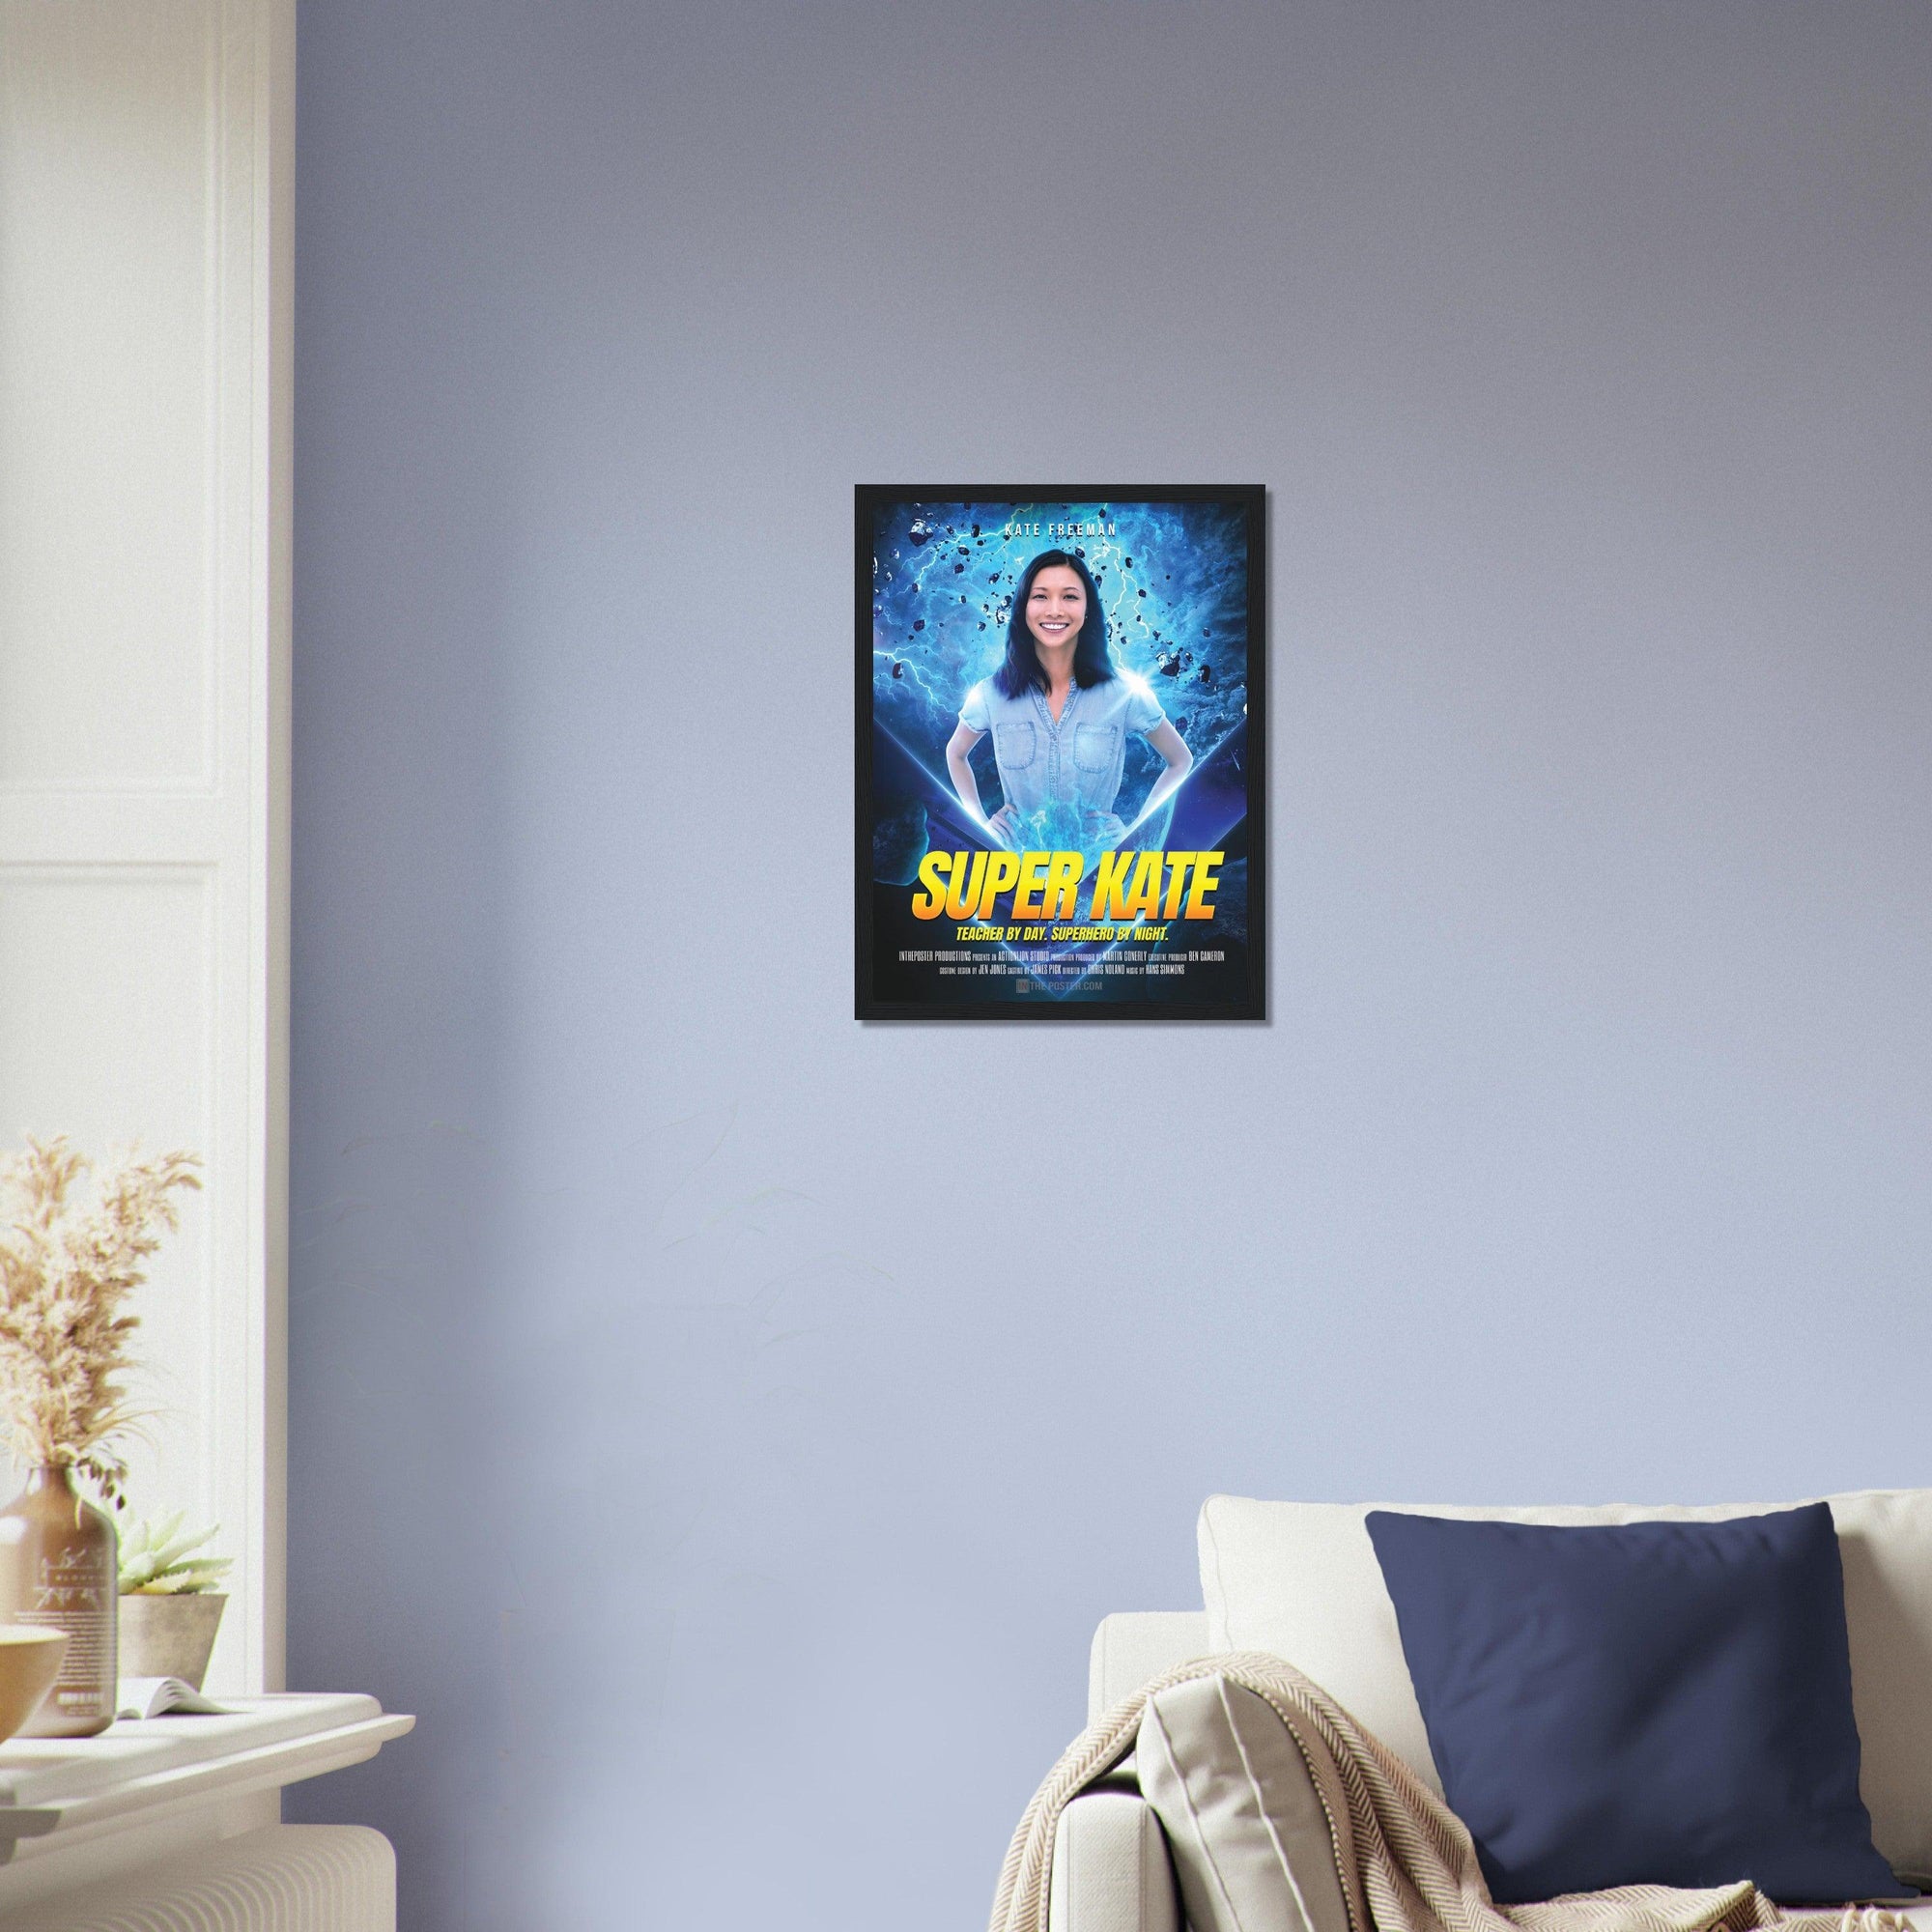 The Super Hero Custom Movie Poster design in a black frame in size small, on the wall above a beige sofa and blue cushion